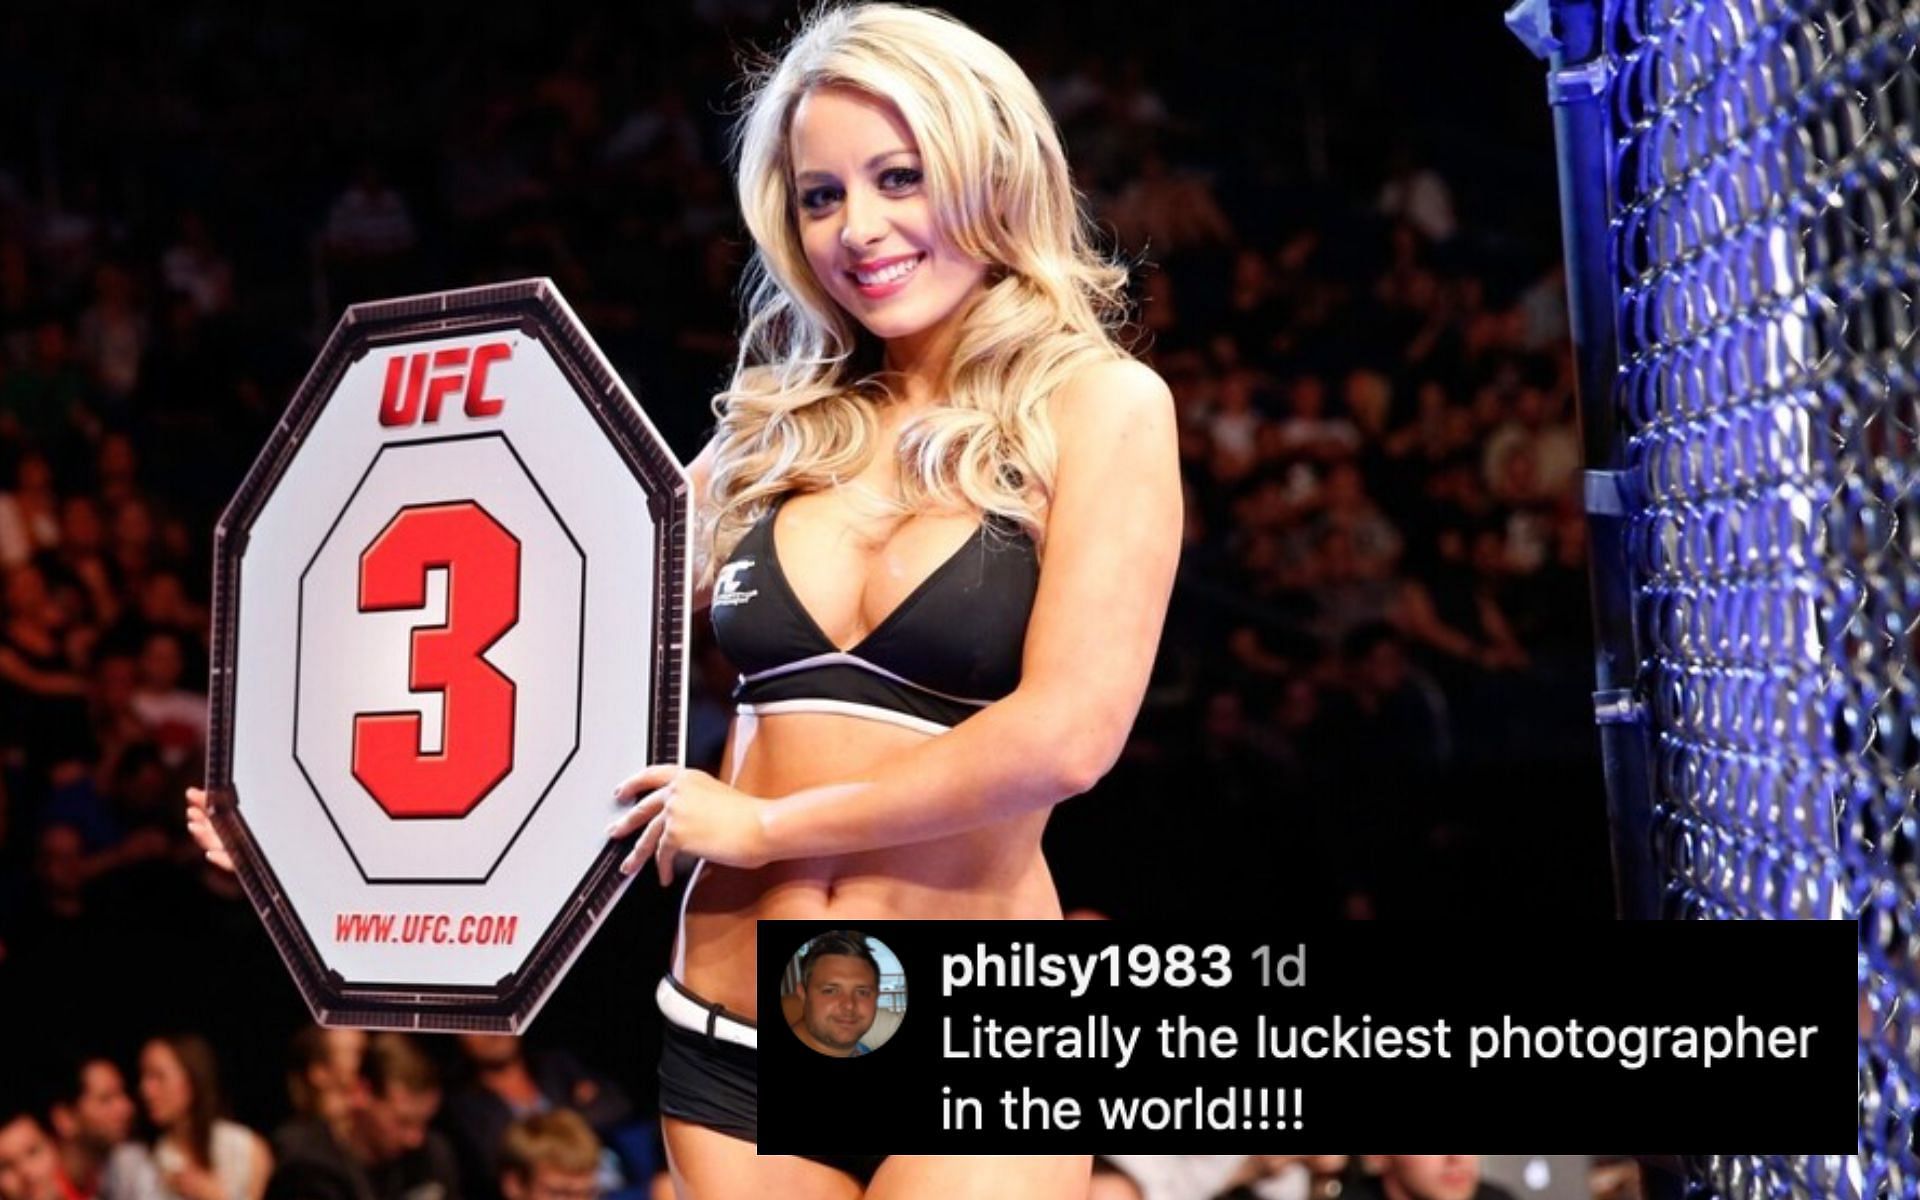 Carly Baker [Image credits: @ULTfightFANS on Twitter] 